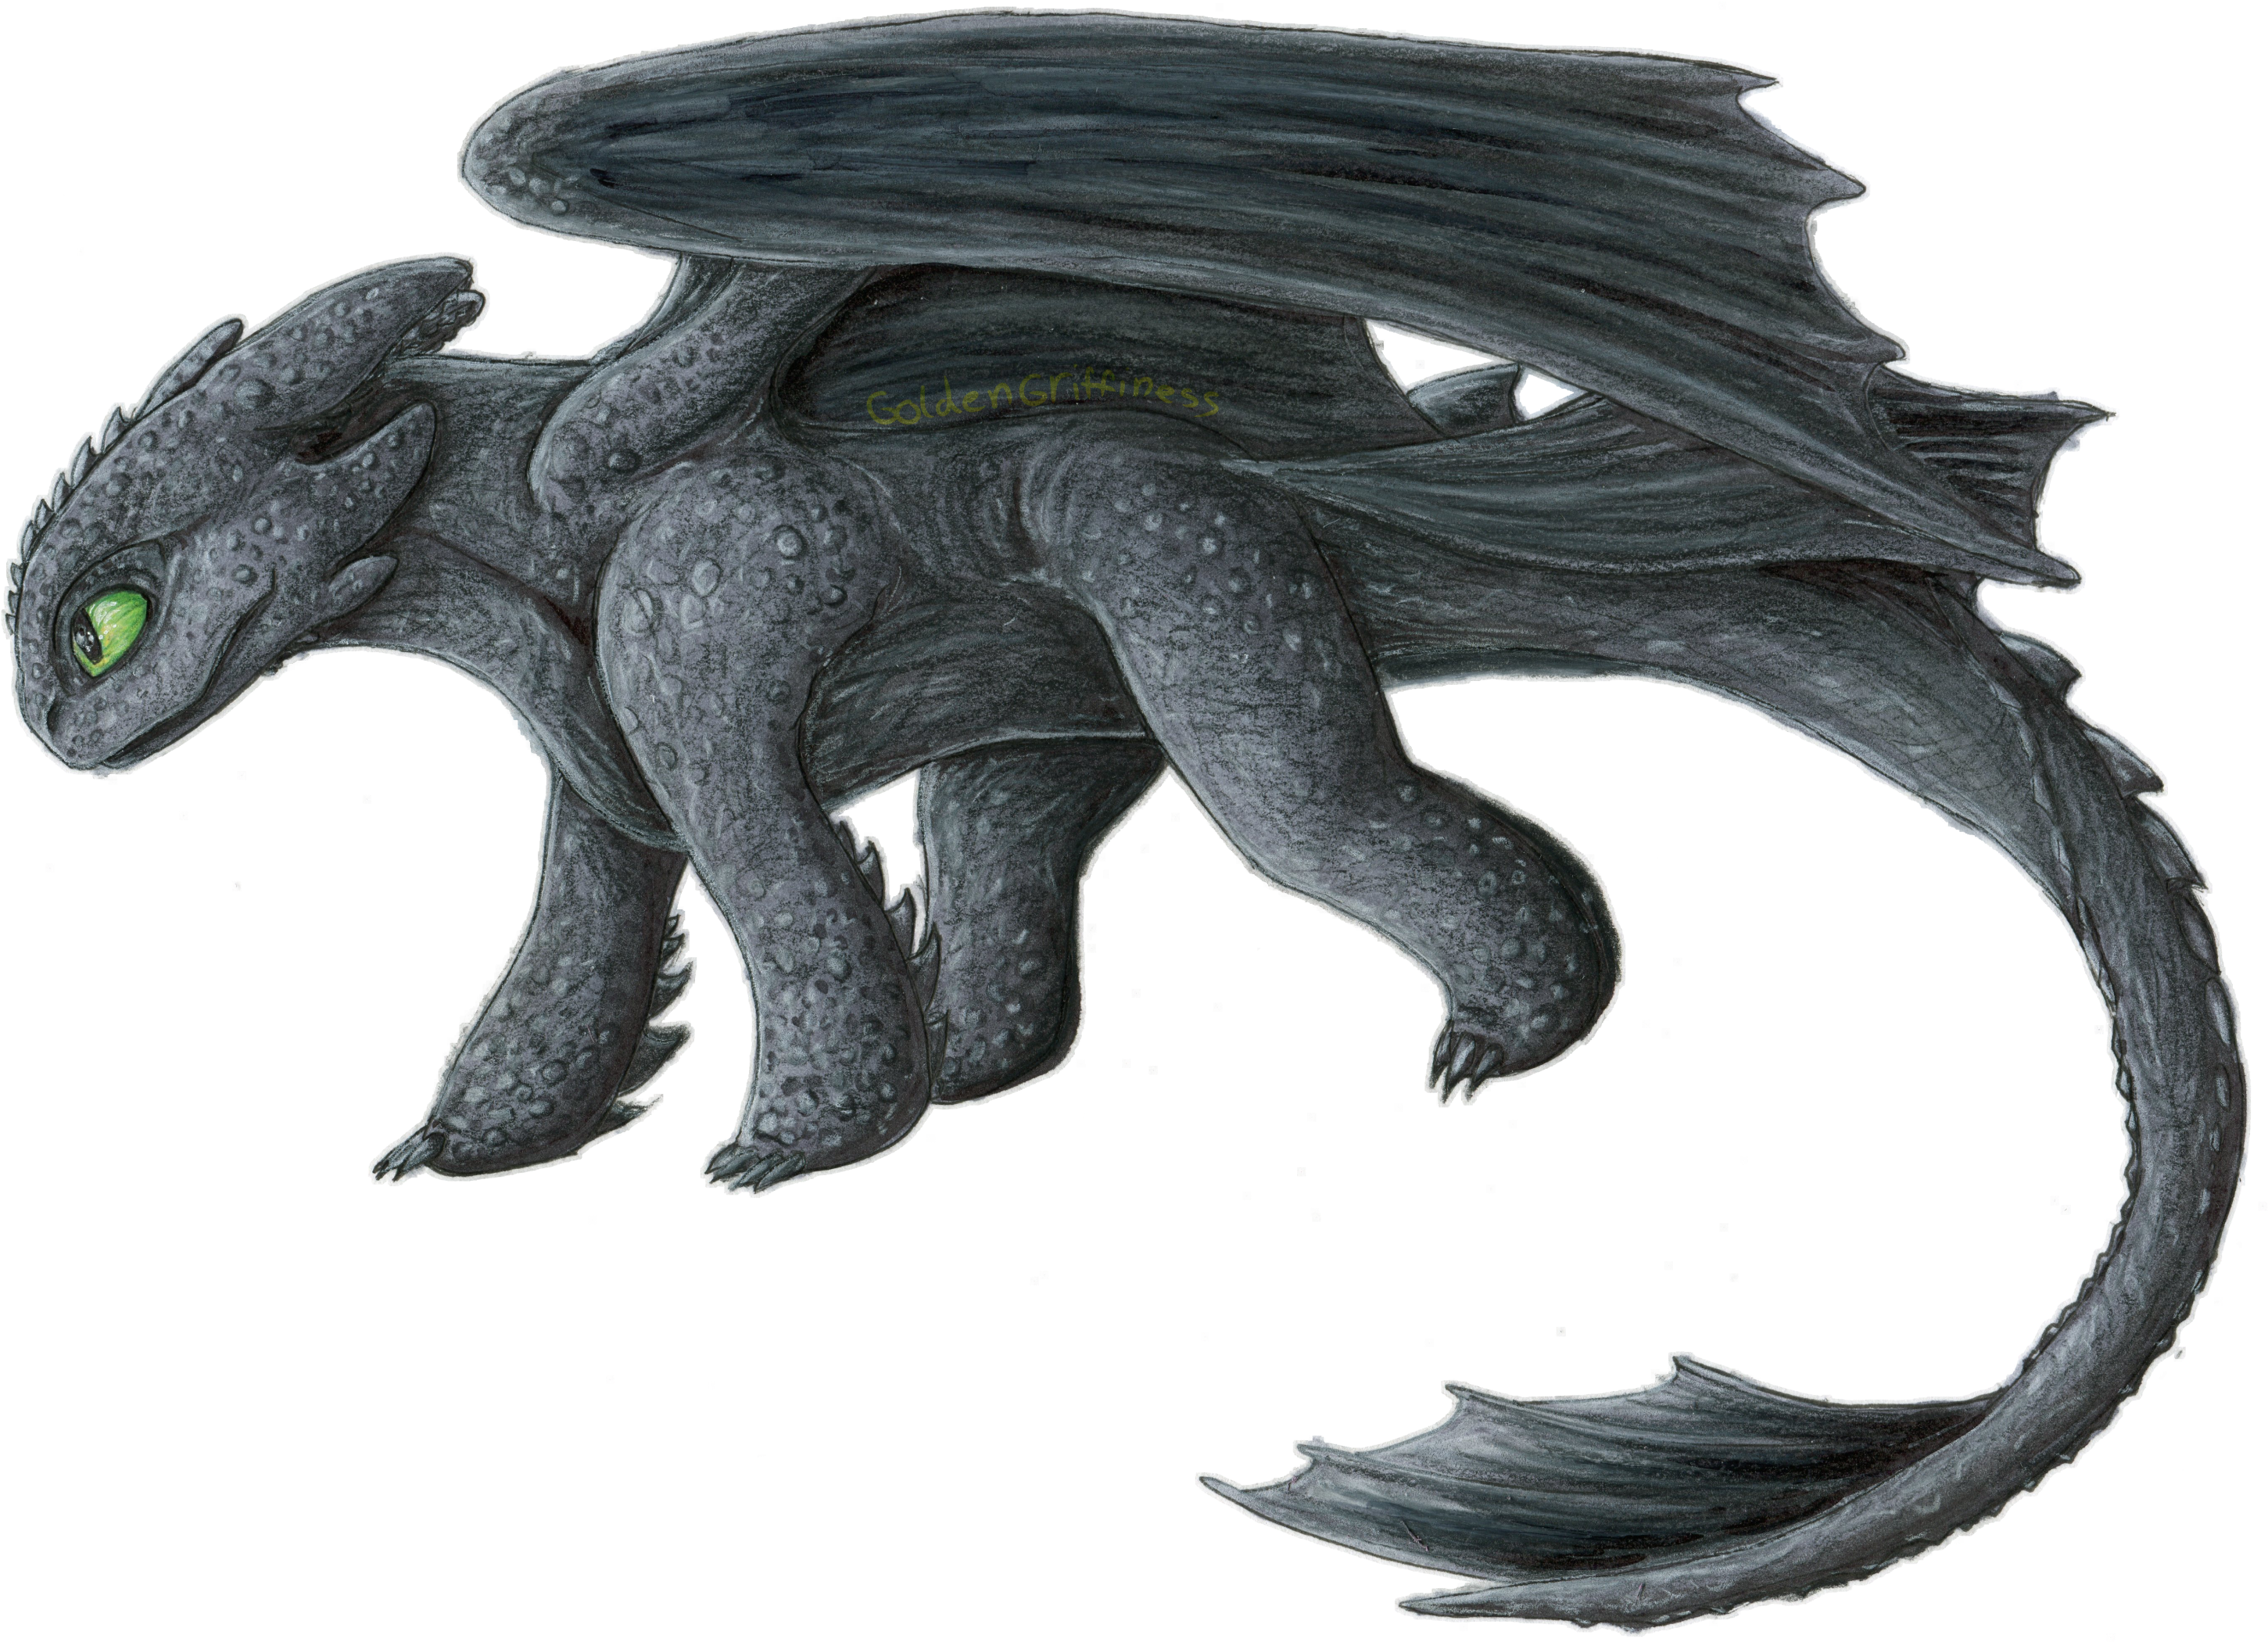 Toothless Dragon PNG Image